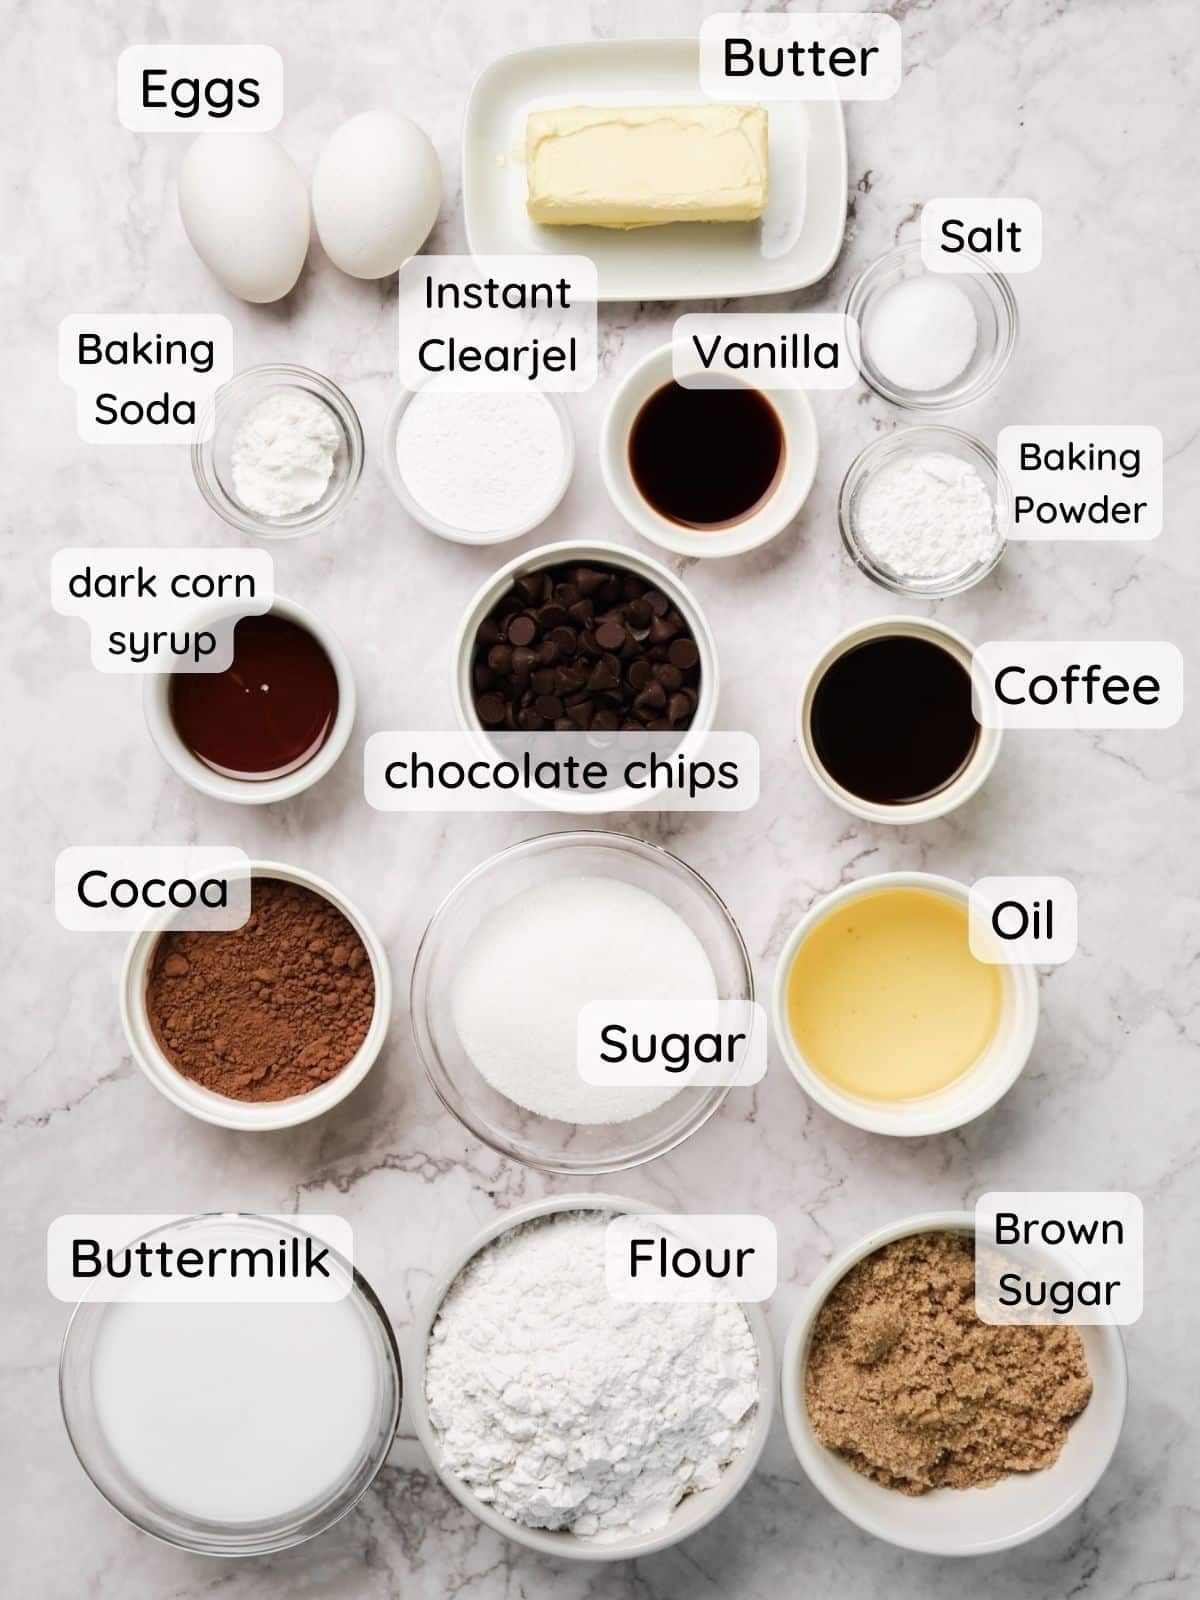 All the chocolate cake batter ingredients with the text: eggs, buttermilk, coffee, vanilla, dark corn syrup, flour, cocoa, baking powder, baking soda, instant clearjel, salt, sugar, brown sugar, chocolate chips."